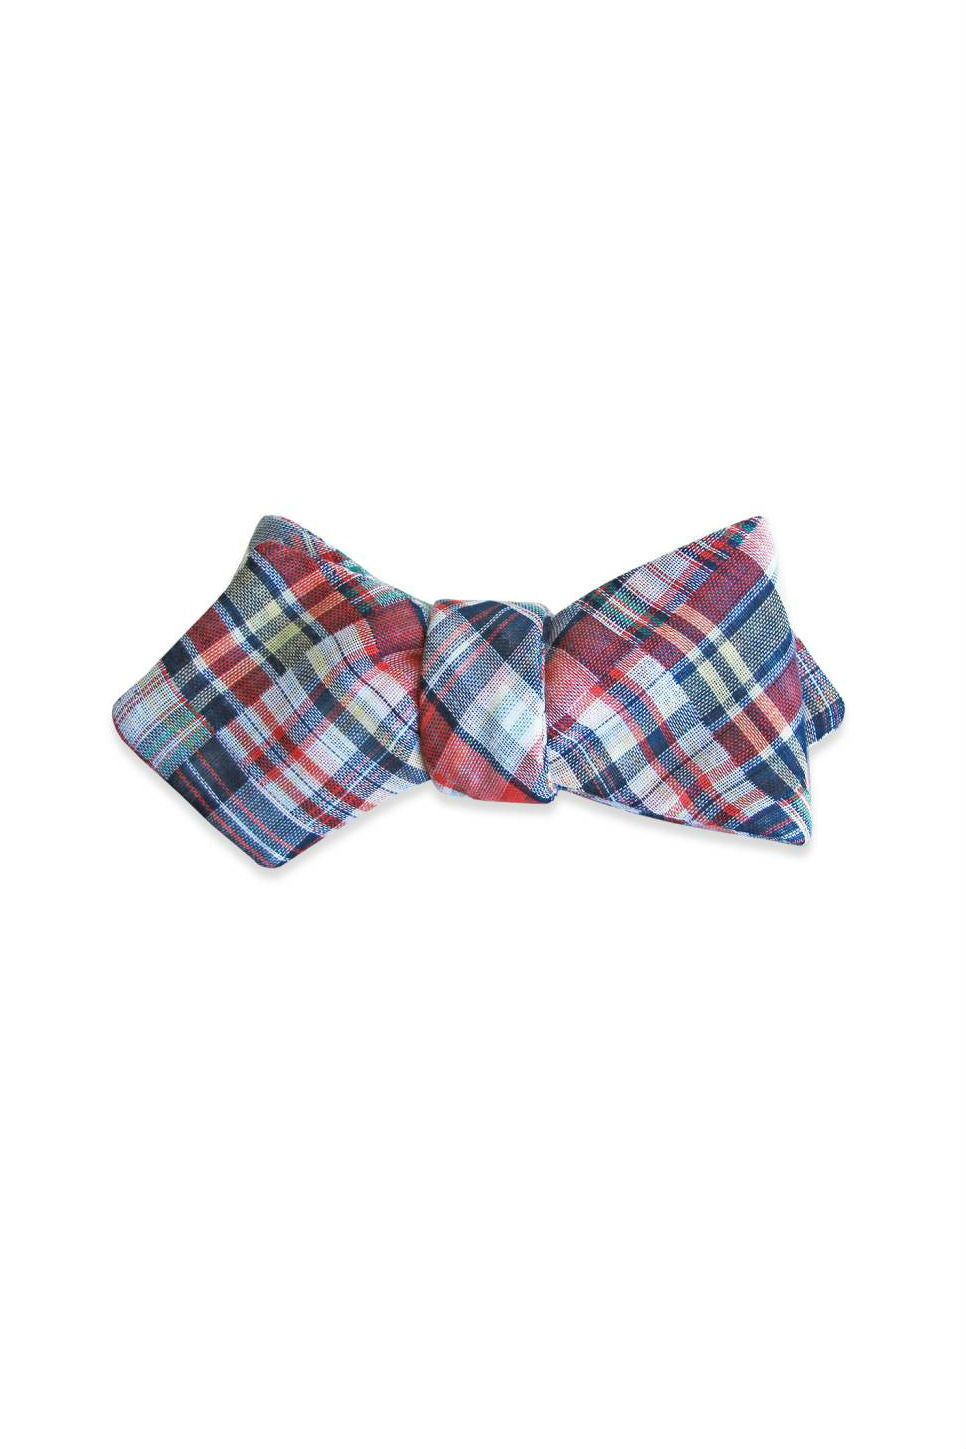 Pocket Square Clothing - The Madras Bow Tie - Blue/Red 